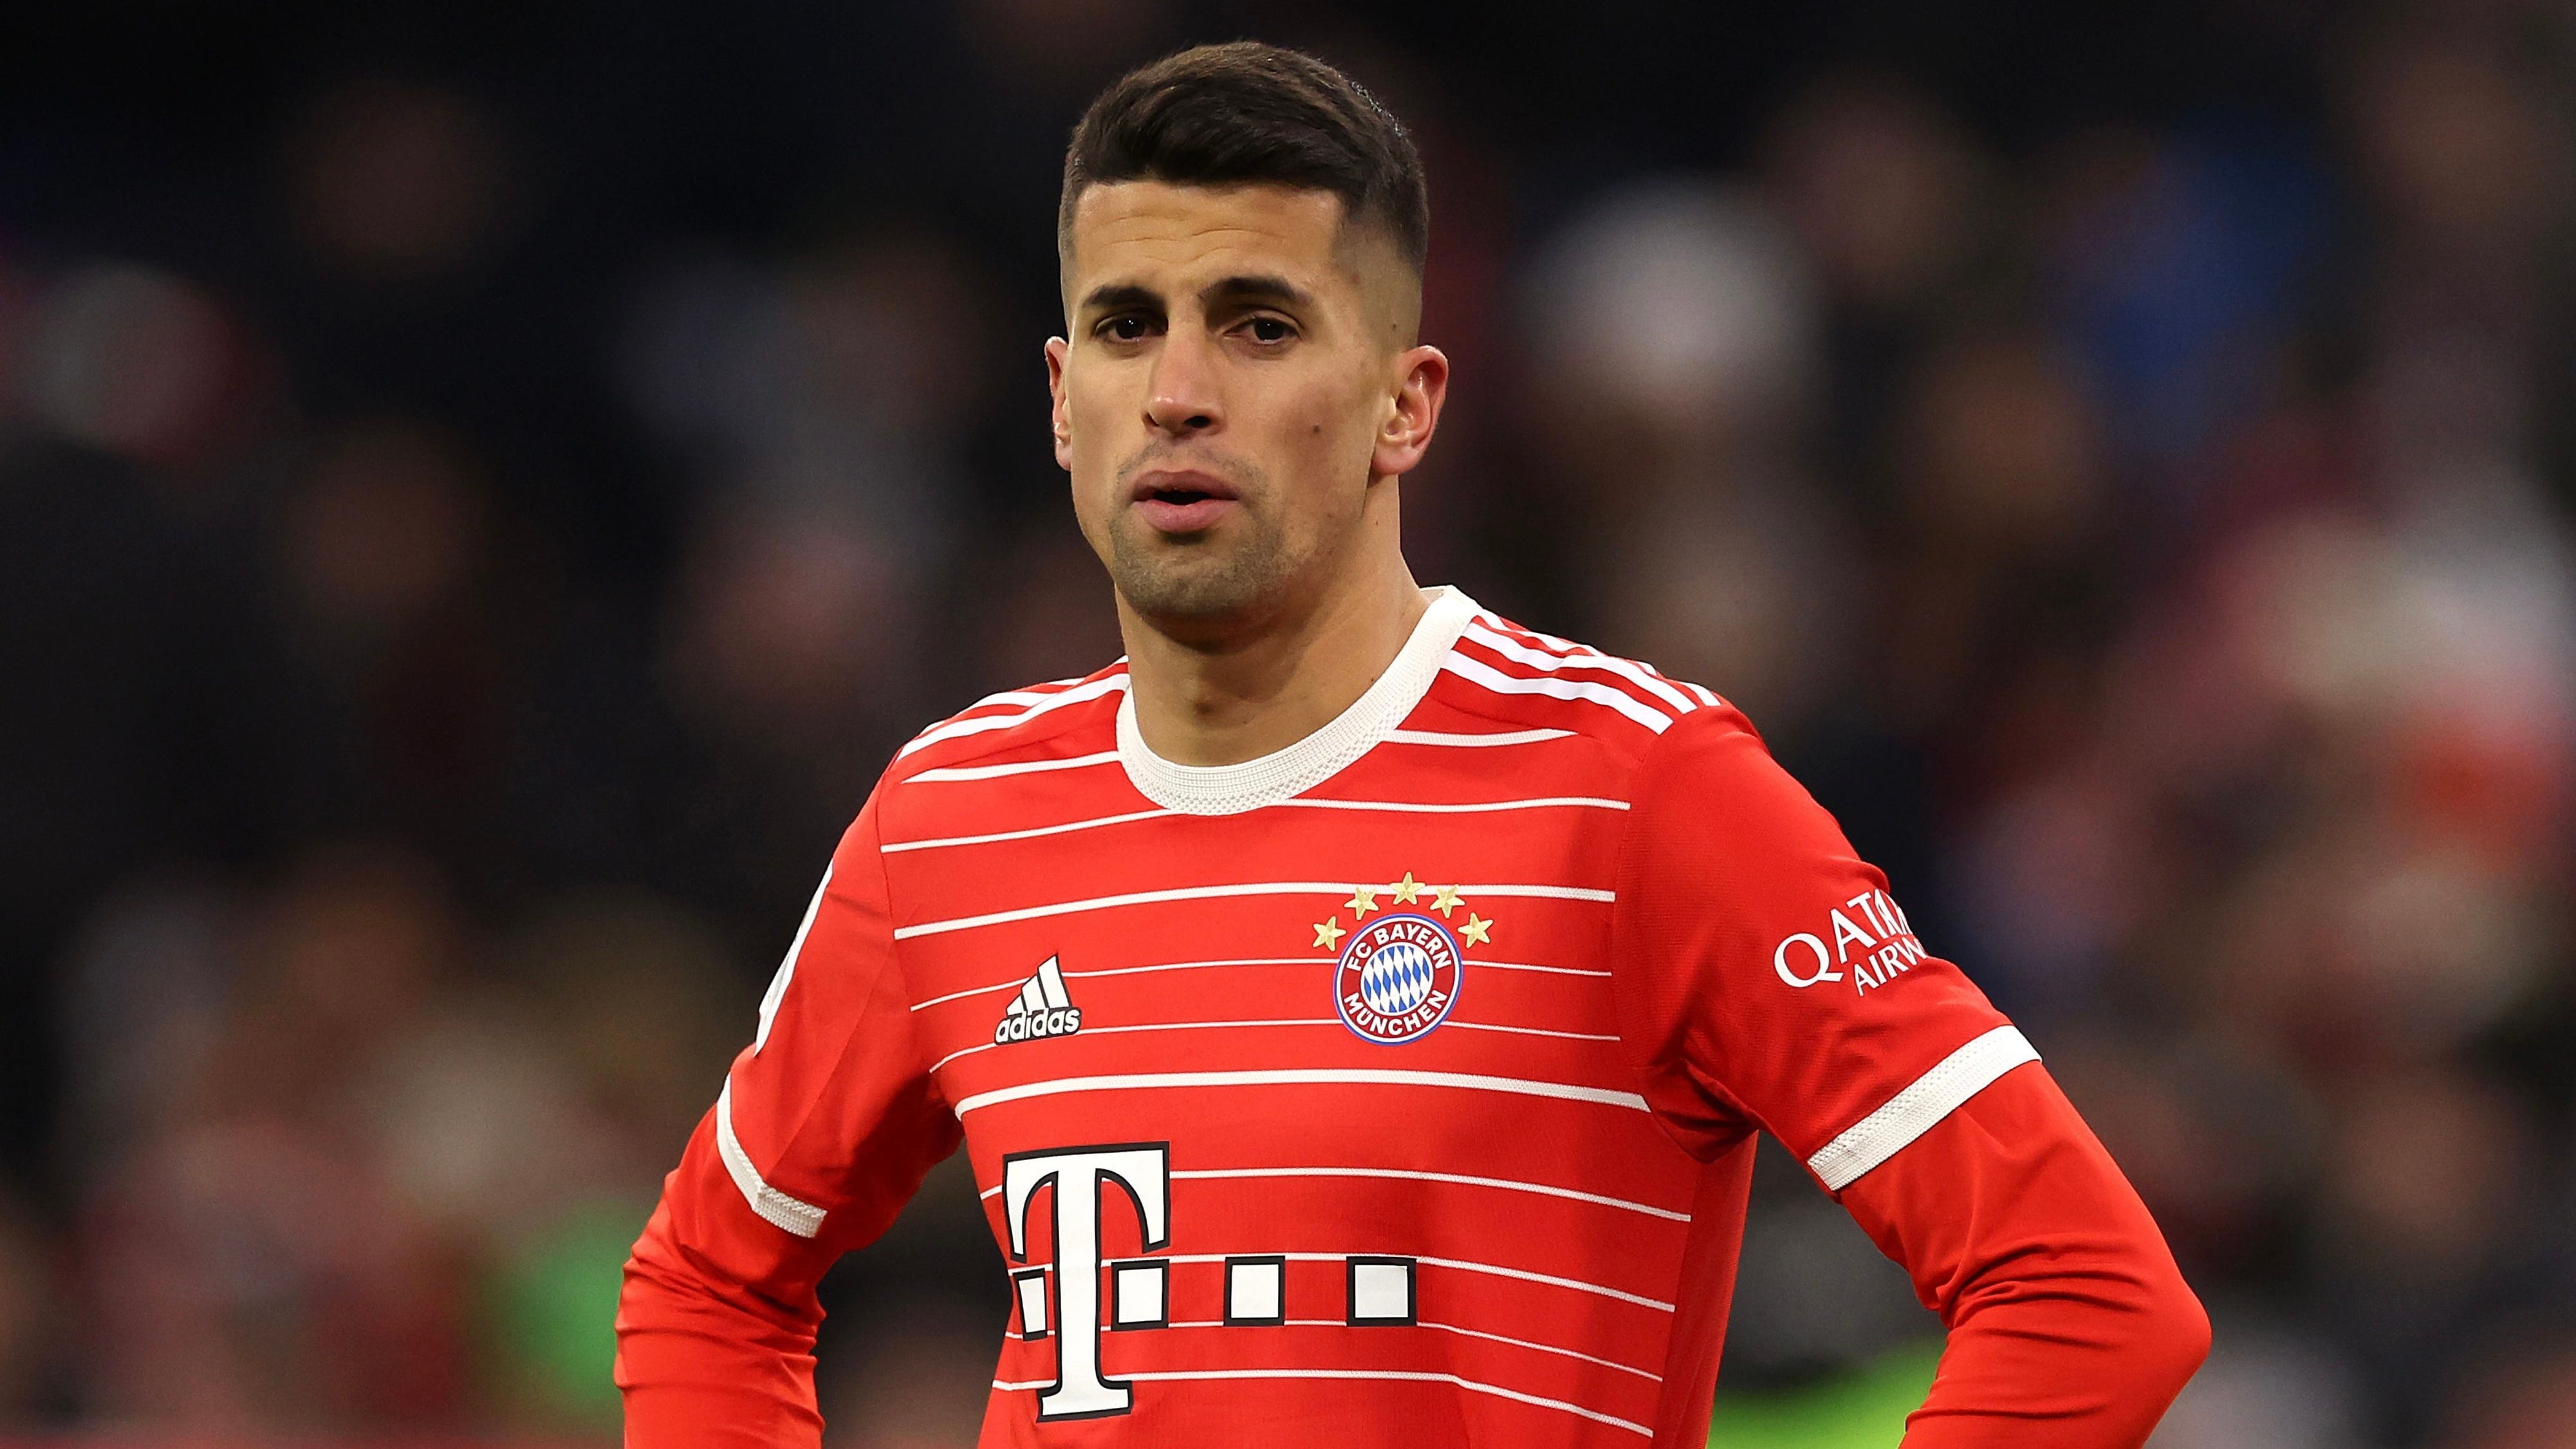 Less and less space for Cancelo at Bayern, Salihamidzic: “He’s not training like we expected”